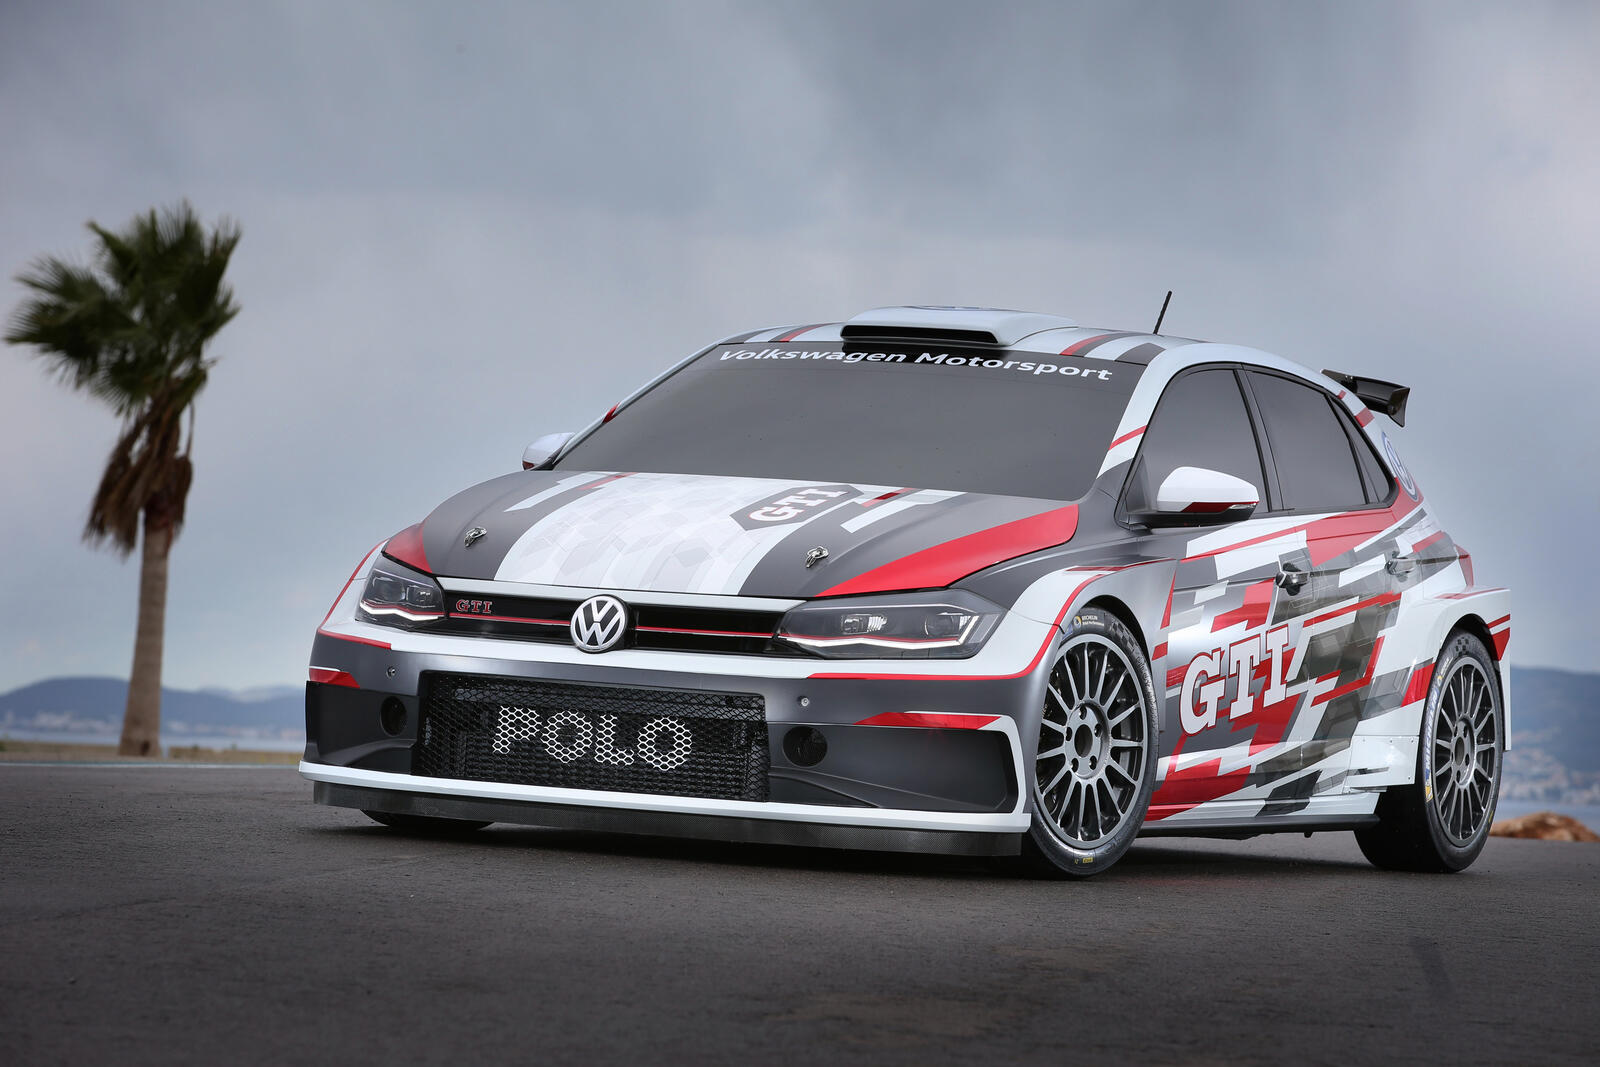 Wallpapers 2018 cars Volkswagen Polo Gti stickers on the desktop